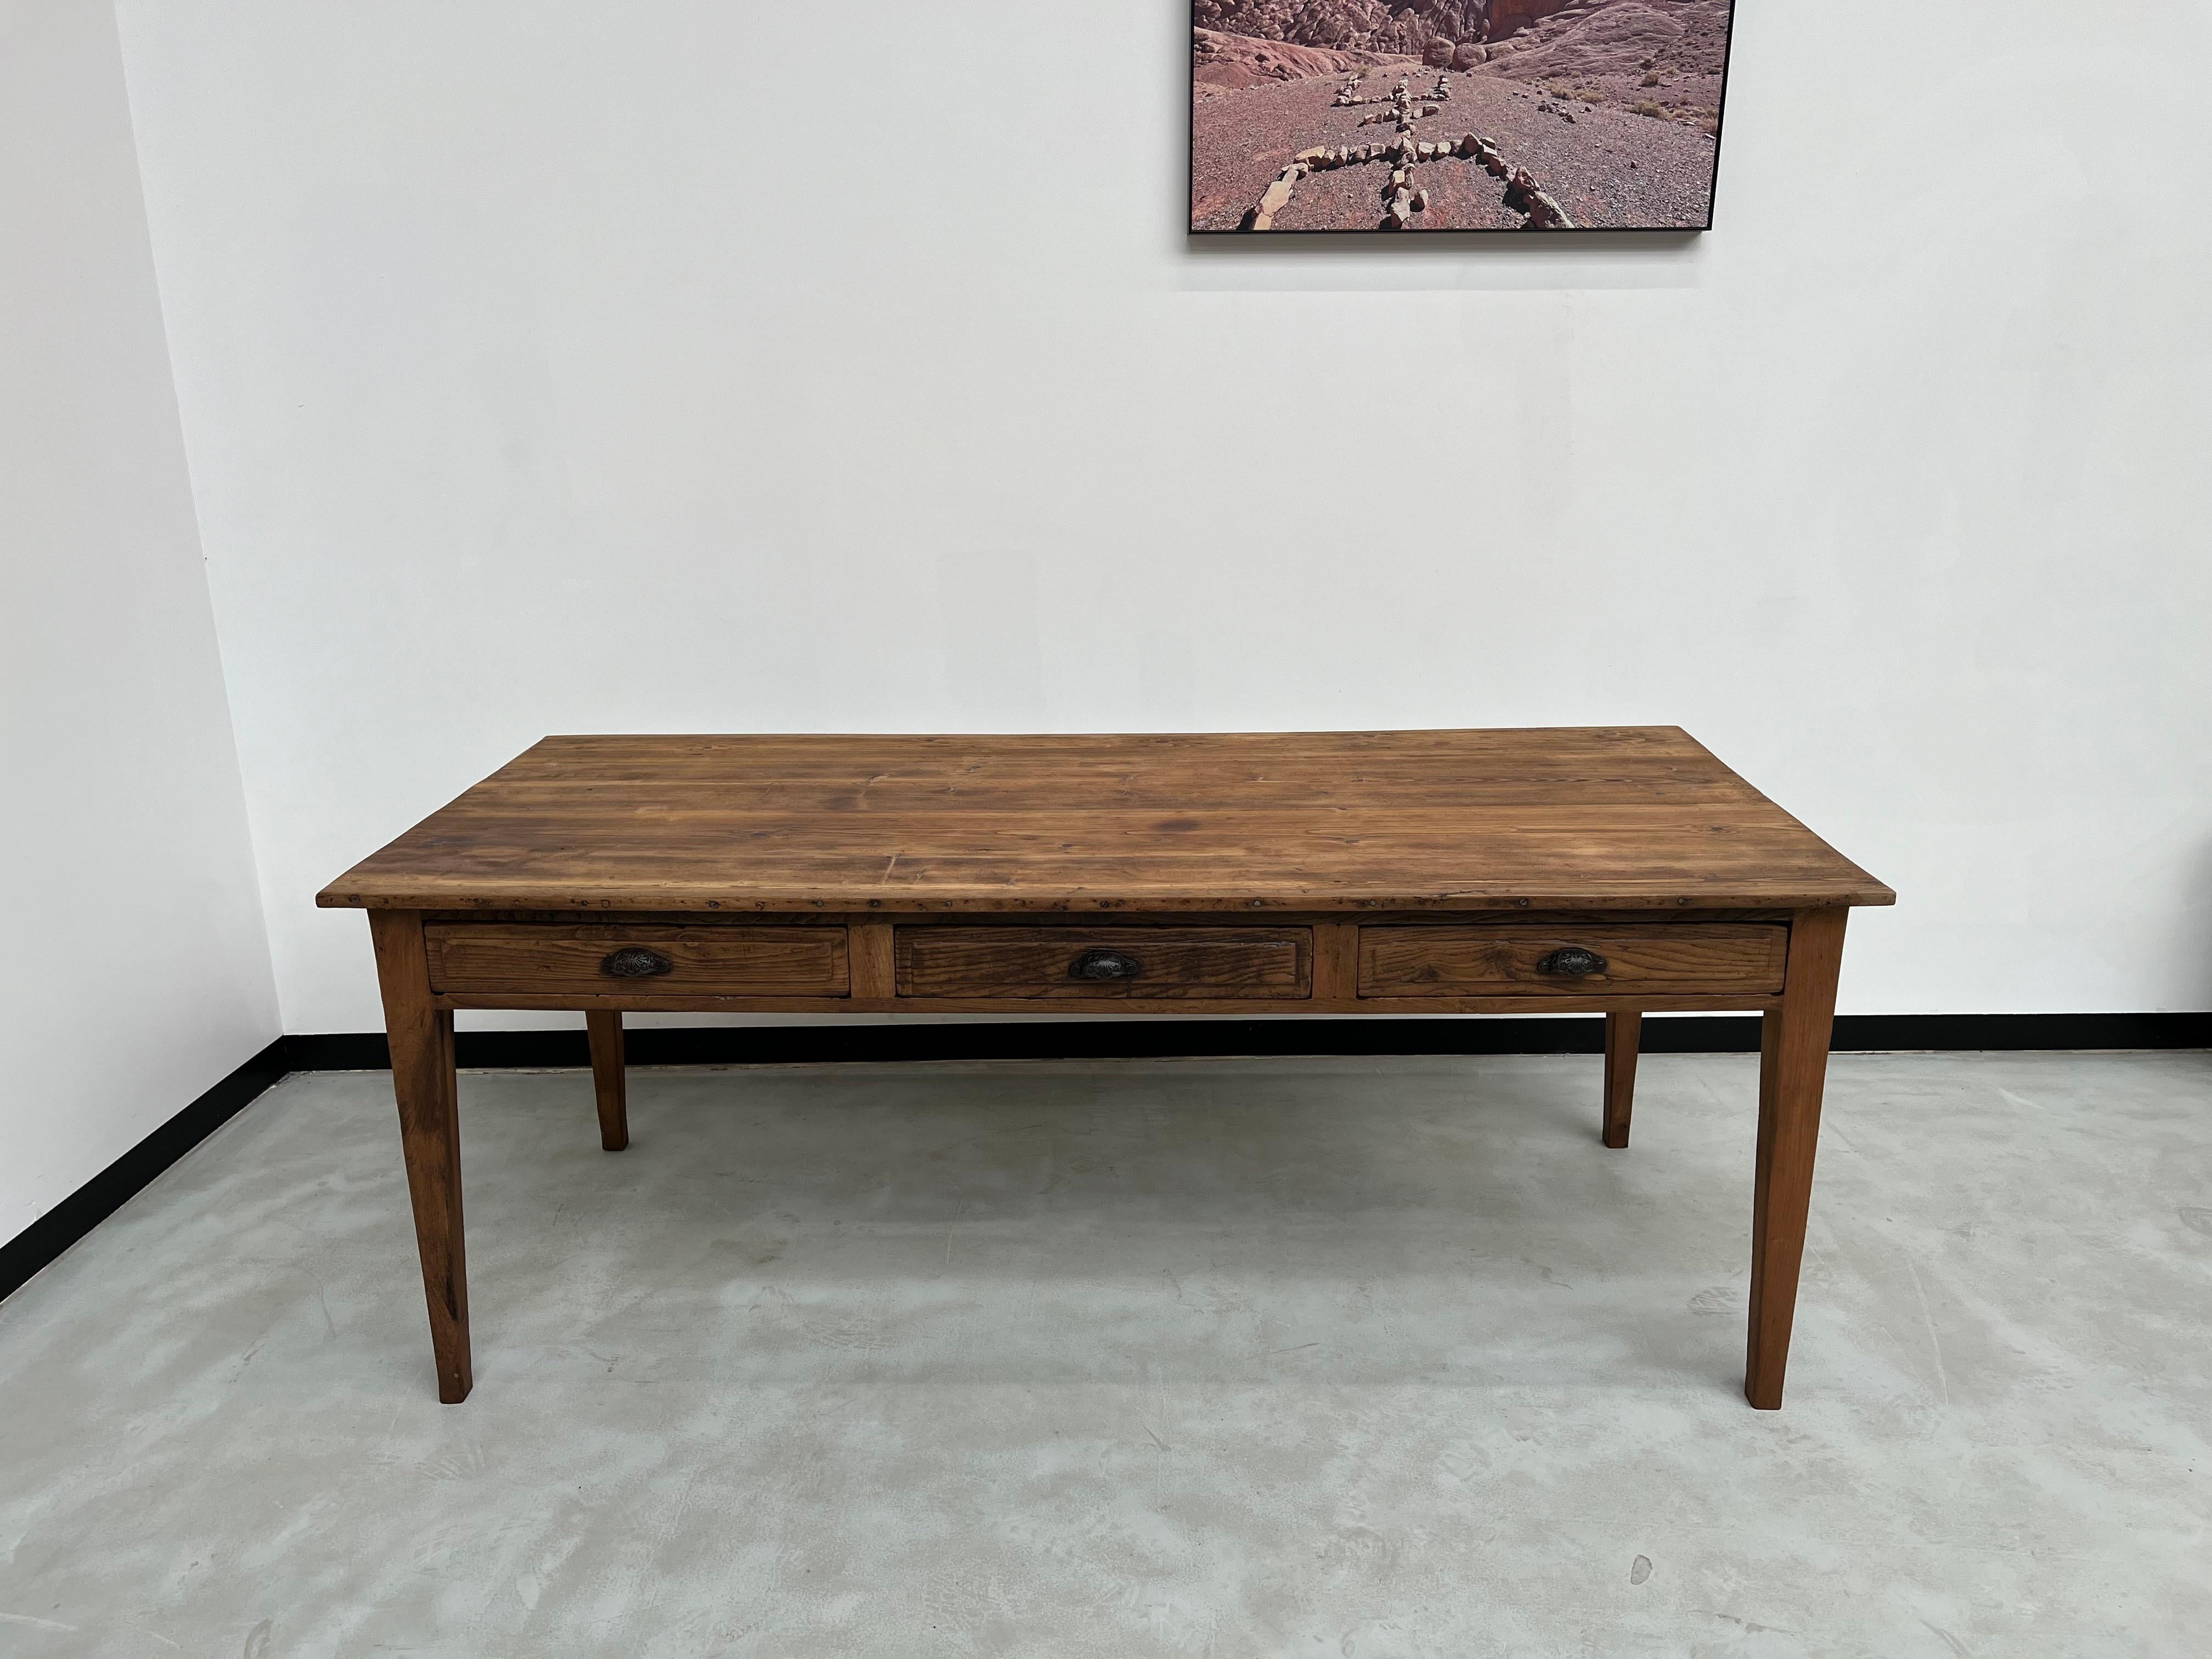 Maison Lecan presents this farm table from the 1950s, entirely restored by us. Its pine top is finished along its lengths with two oak strips to improve the aesthetics. Its legs and drawer fronts are also made of solid oak. The three drawers are